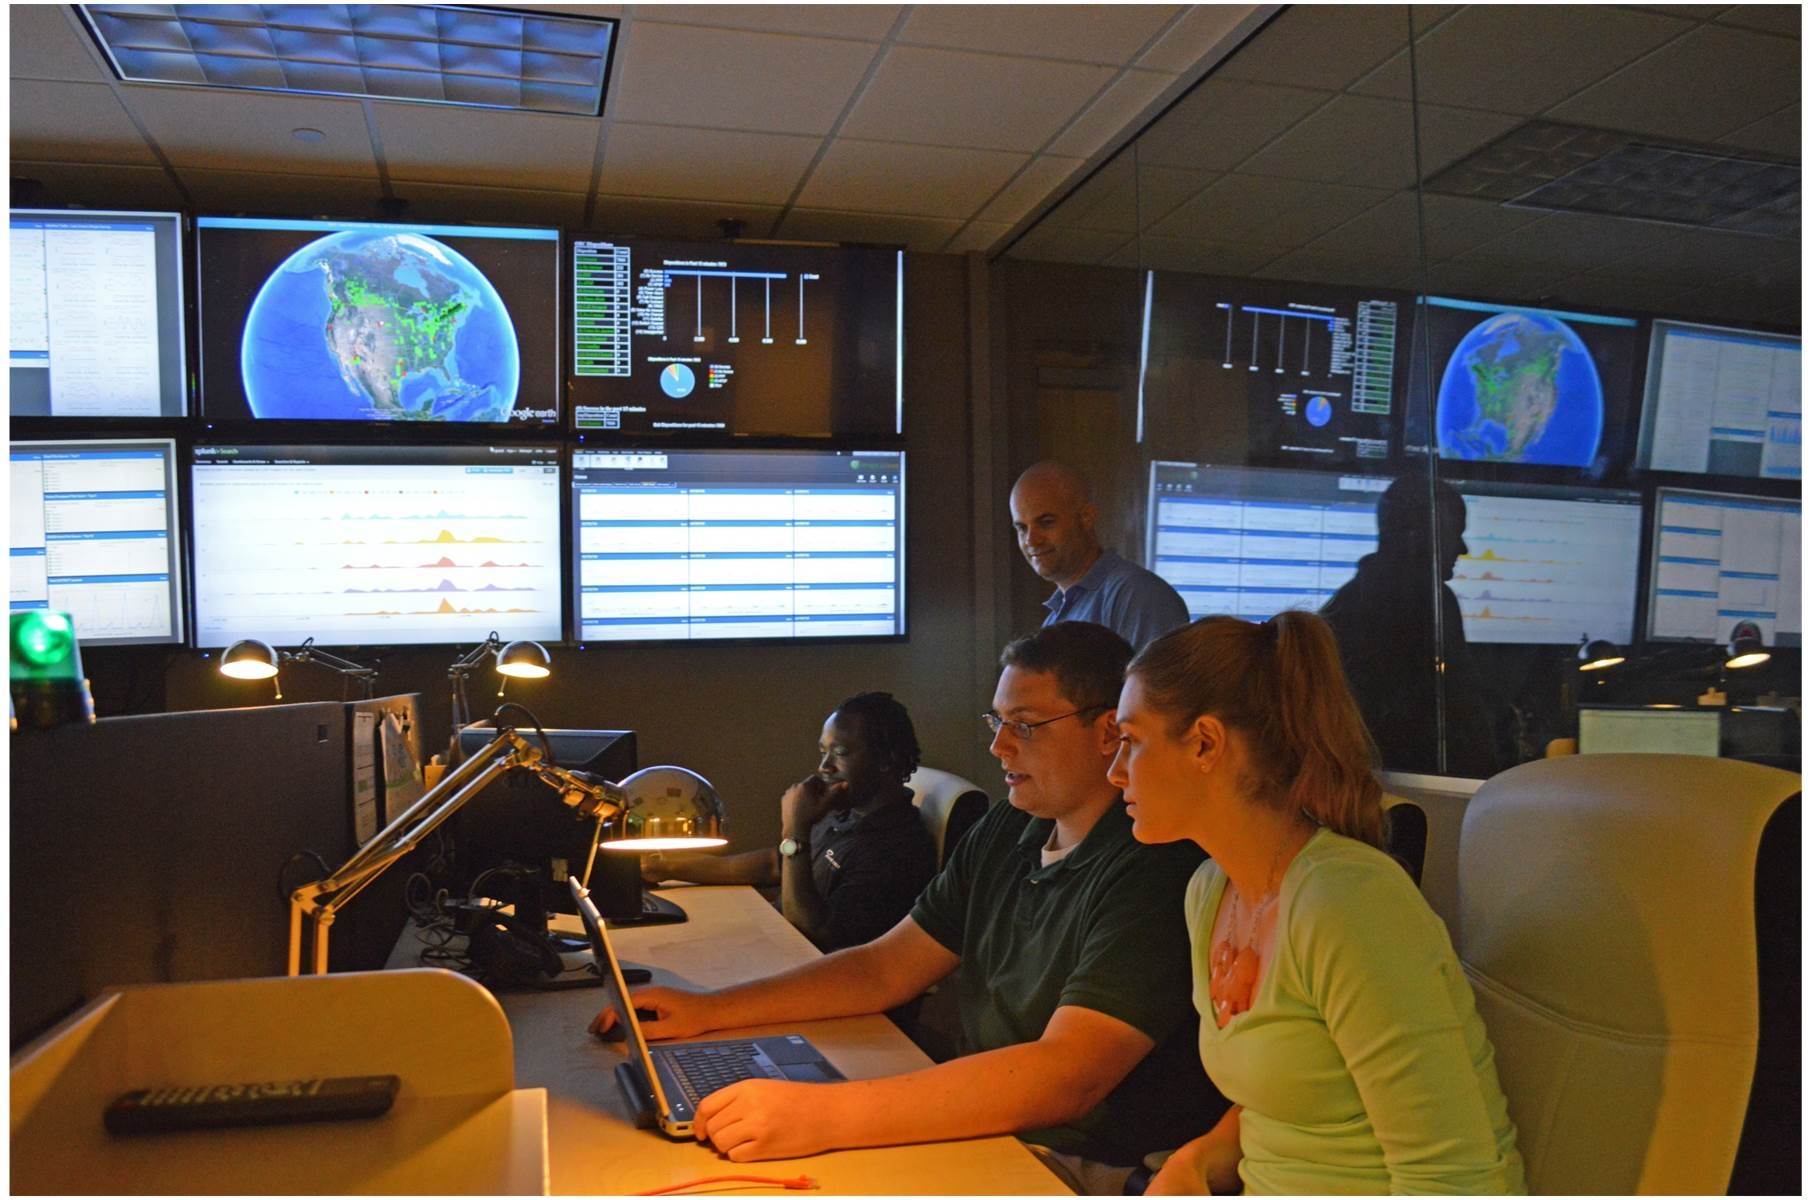 A view from inside the Network Operations Center. Real-time monitoring tools ensure reliable system performance.